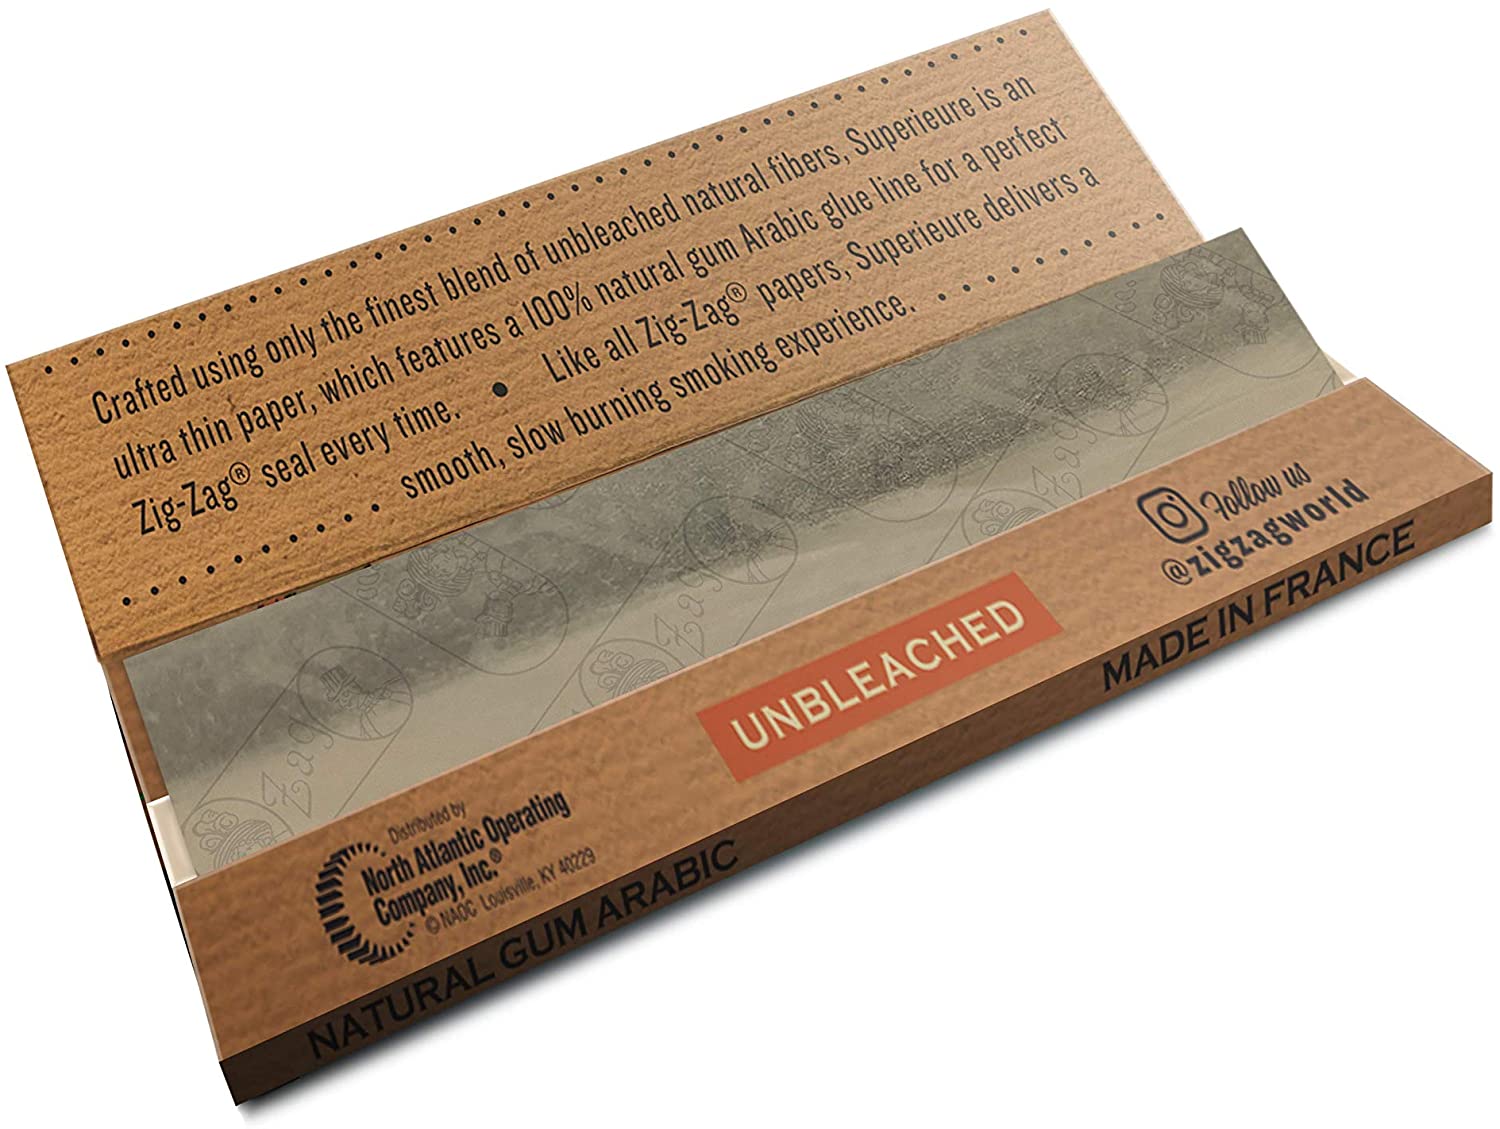 Zig Zag Rolling Papers Superiure King Slim Unbleached - 24ct